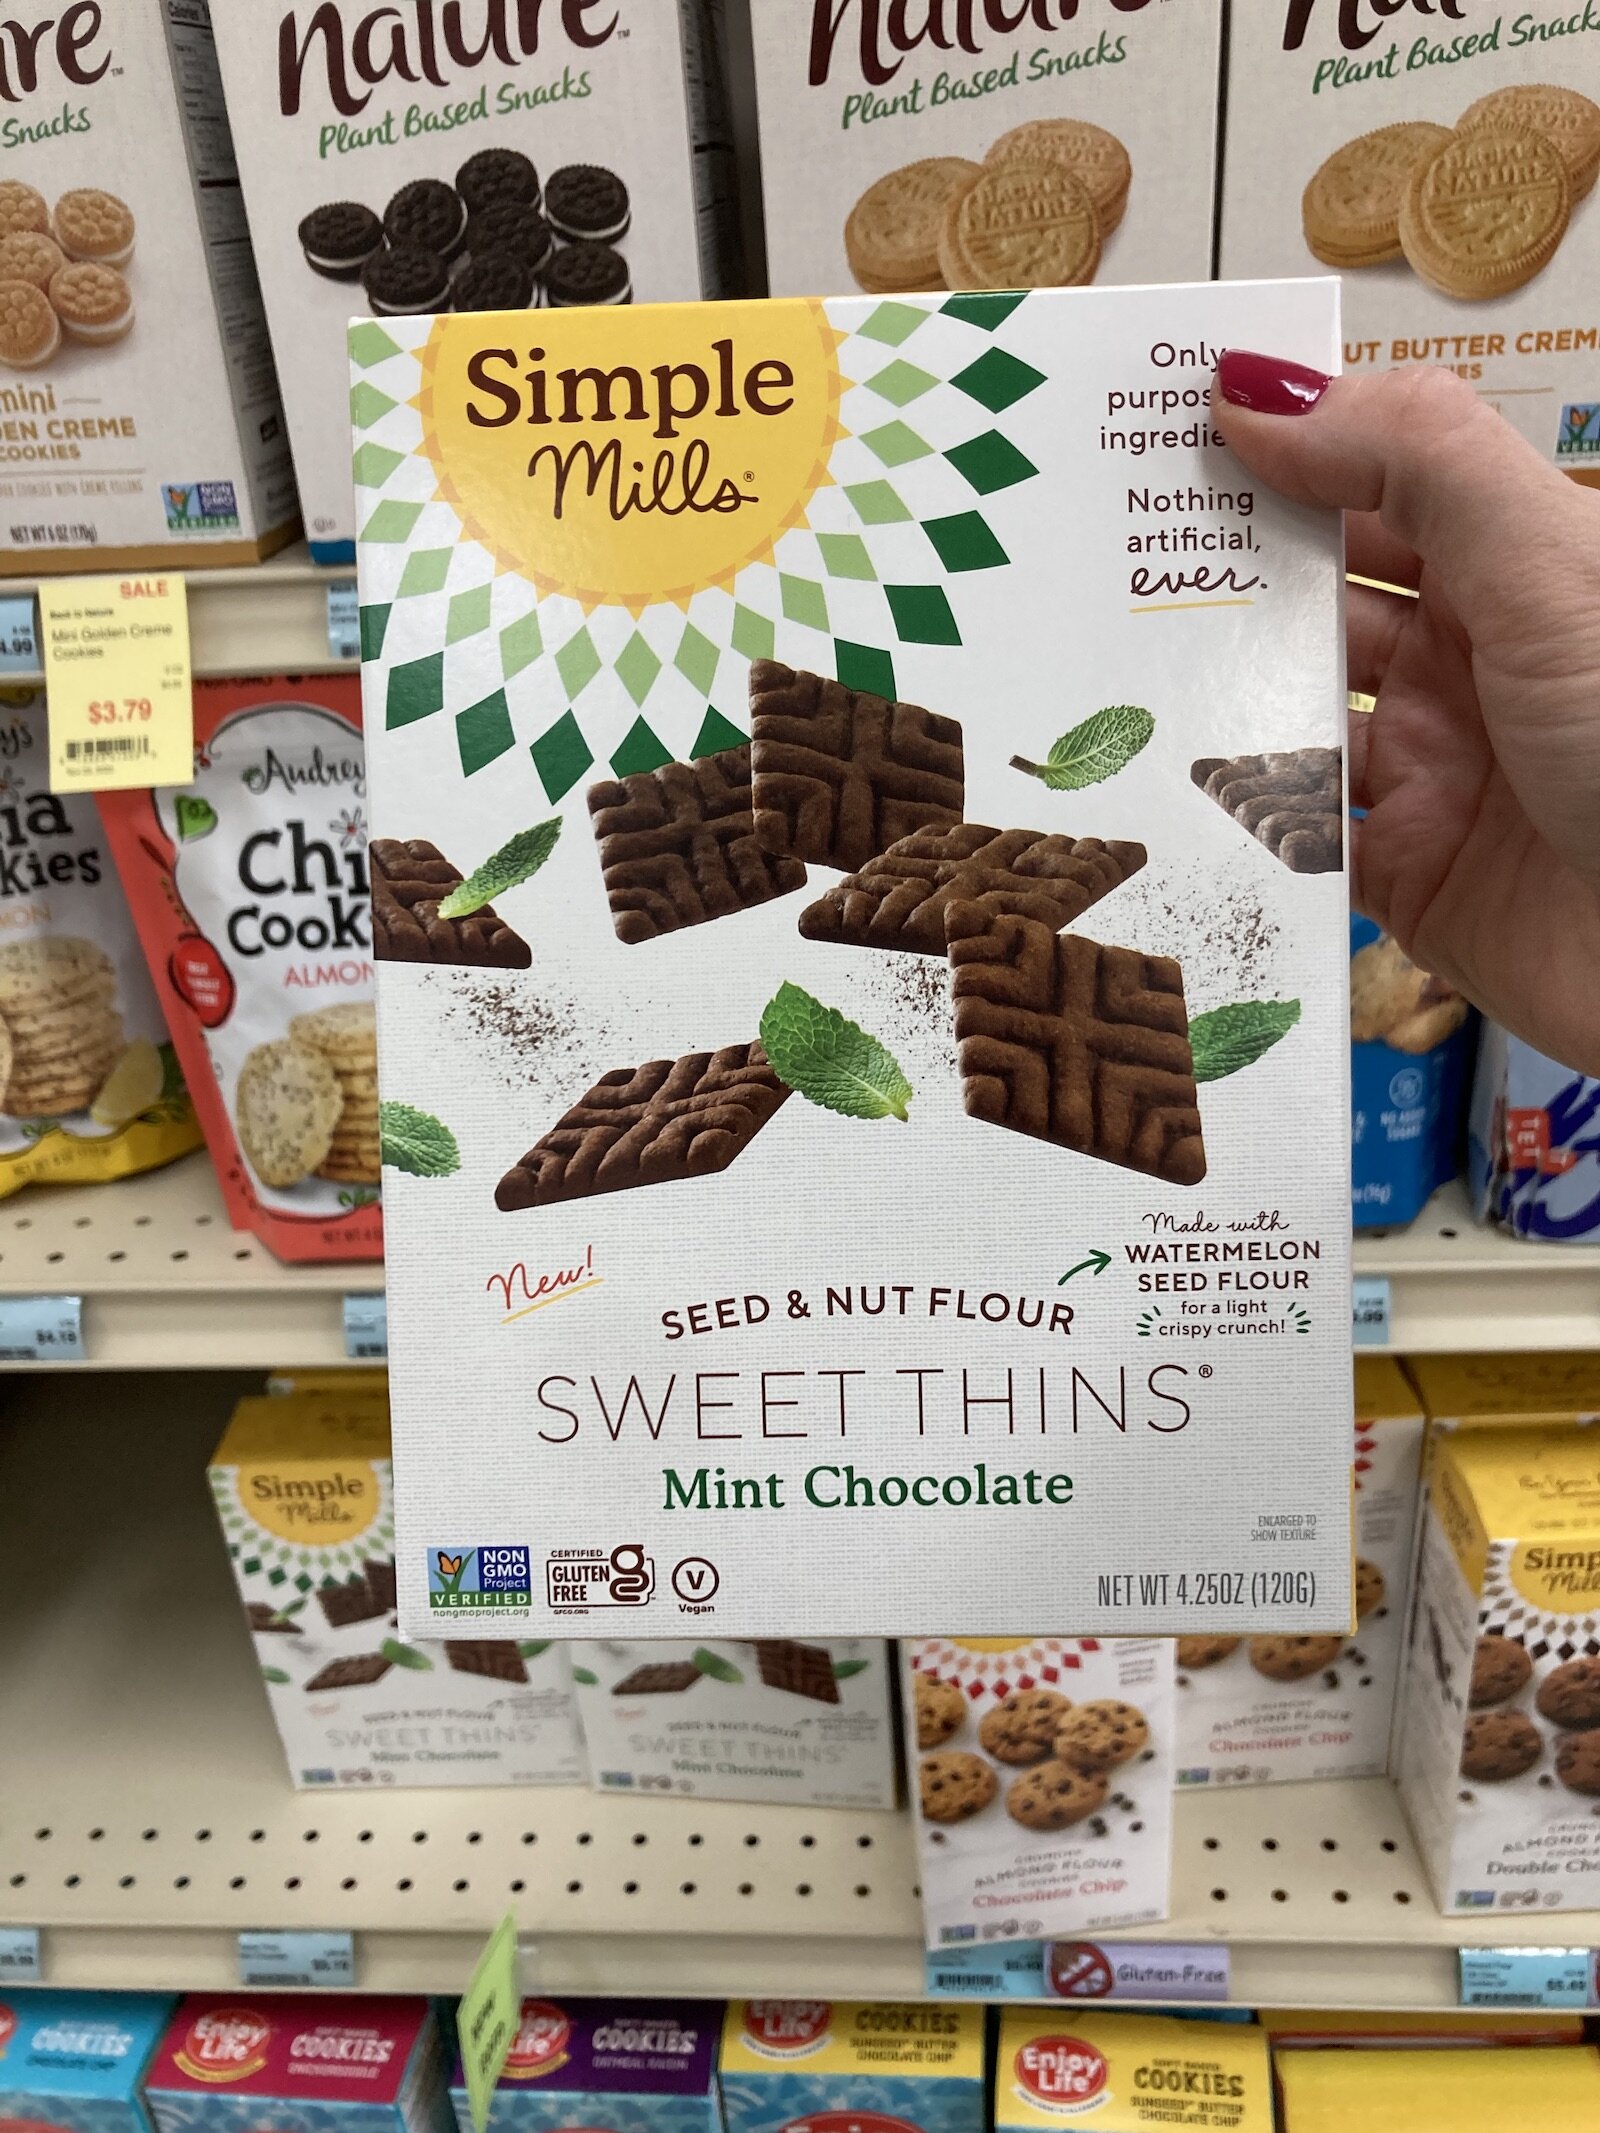 Simple Mills thin mint cookies at the Health Food Shoppe.